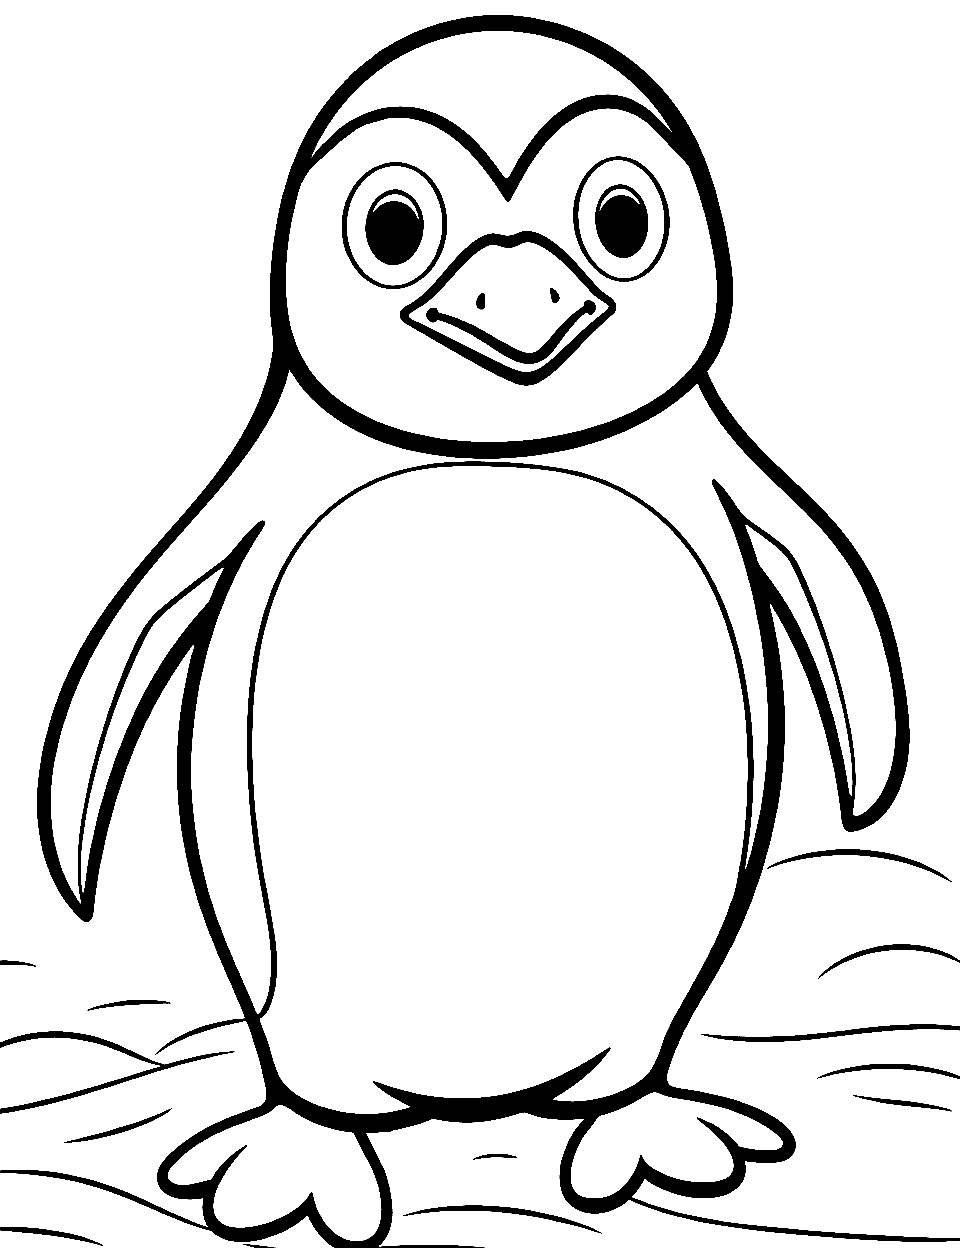 Simple Penguin Pose Coloring Page - A basic penguin standing straight, ideal for younger kids.